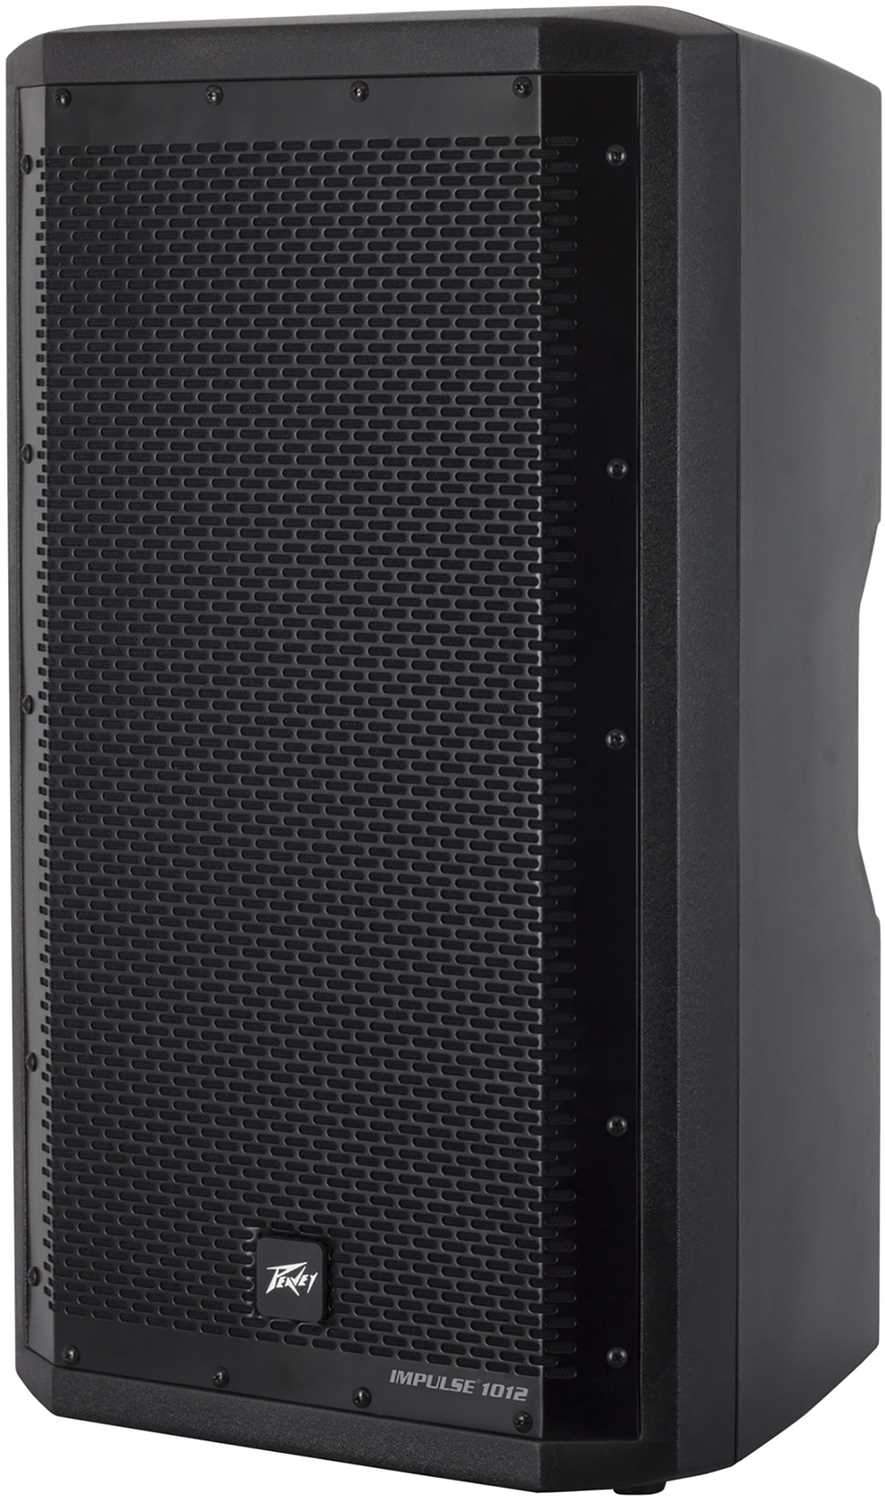 Peavey Impulse 1012 Weather-Resistant 12-Inch Passive Speaker - PSSL ProSound and Stage Lighting